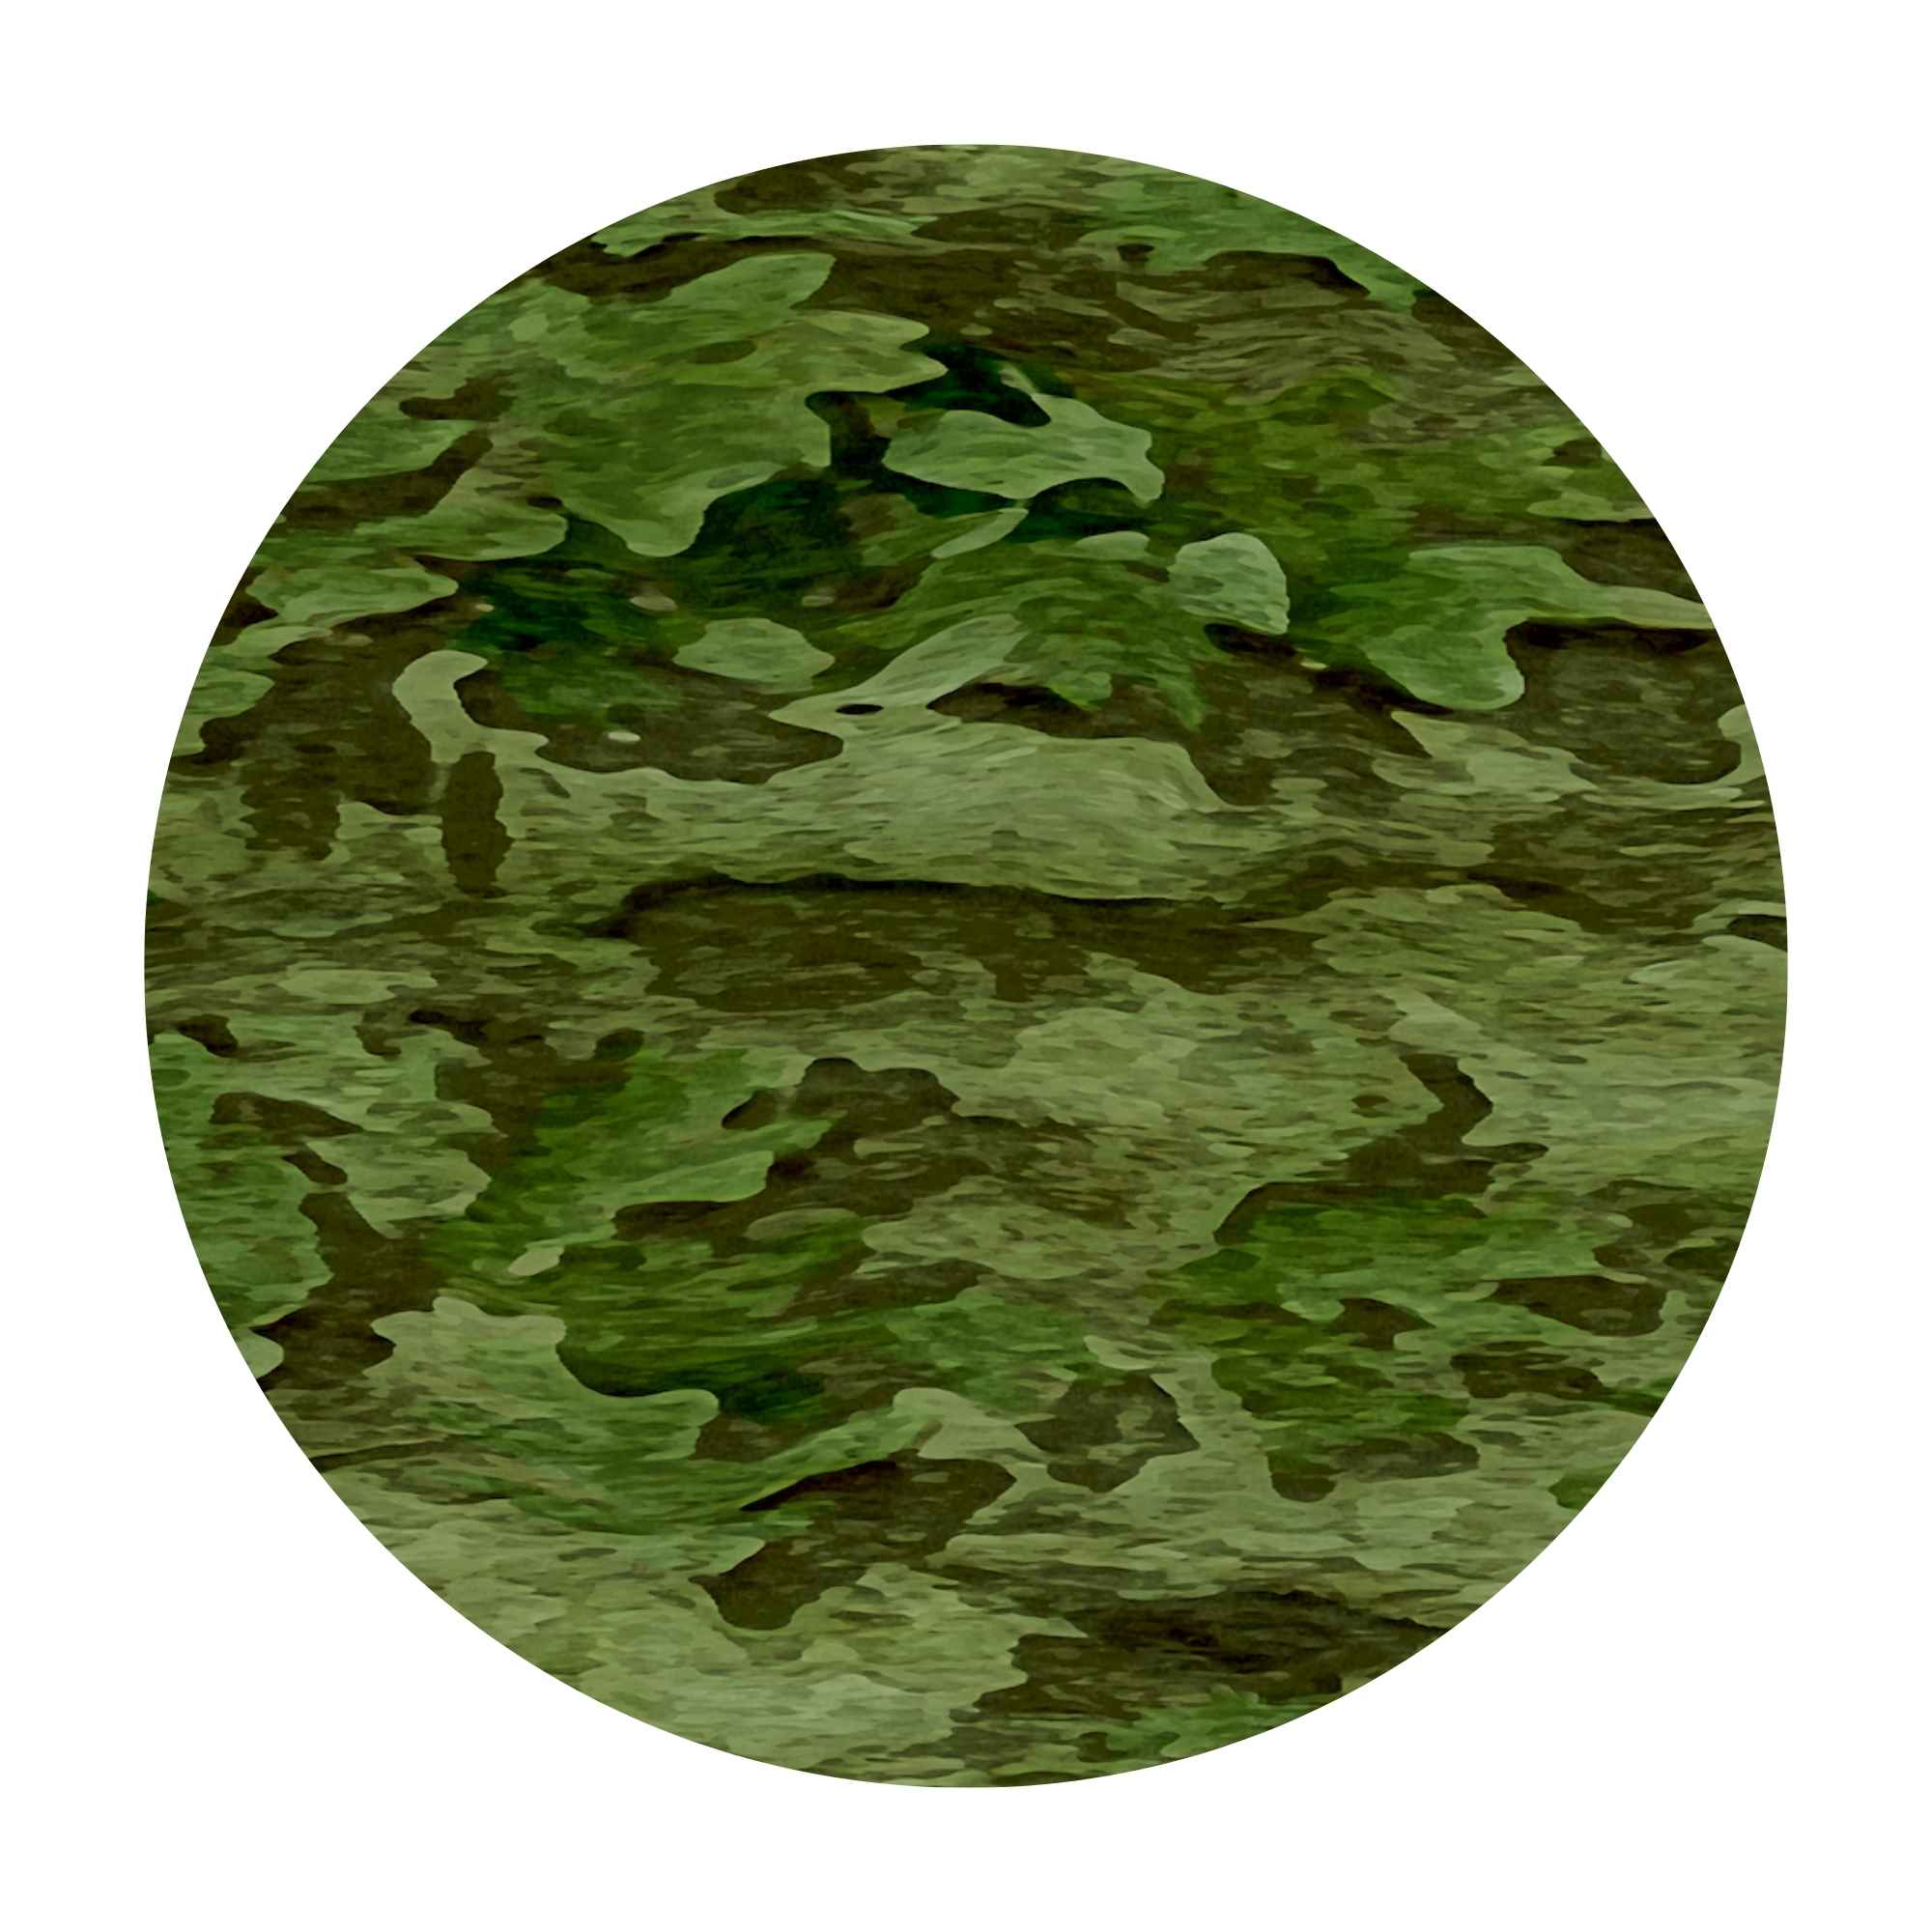 A-tacs Fg Green Droplet Ruin Camouflage Camouflage Camouflage Cs